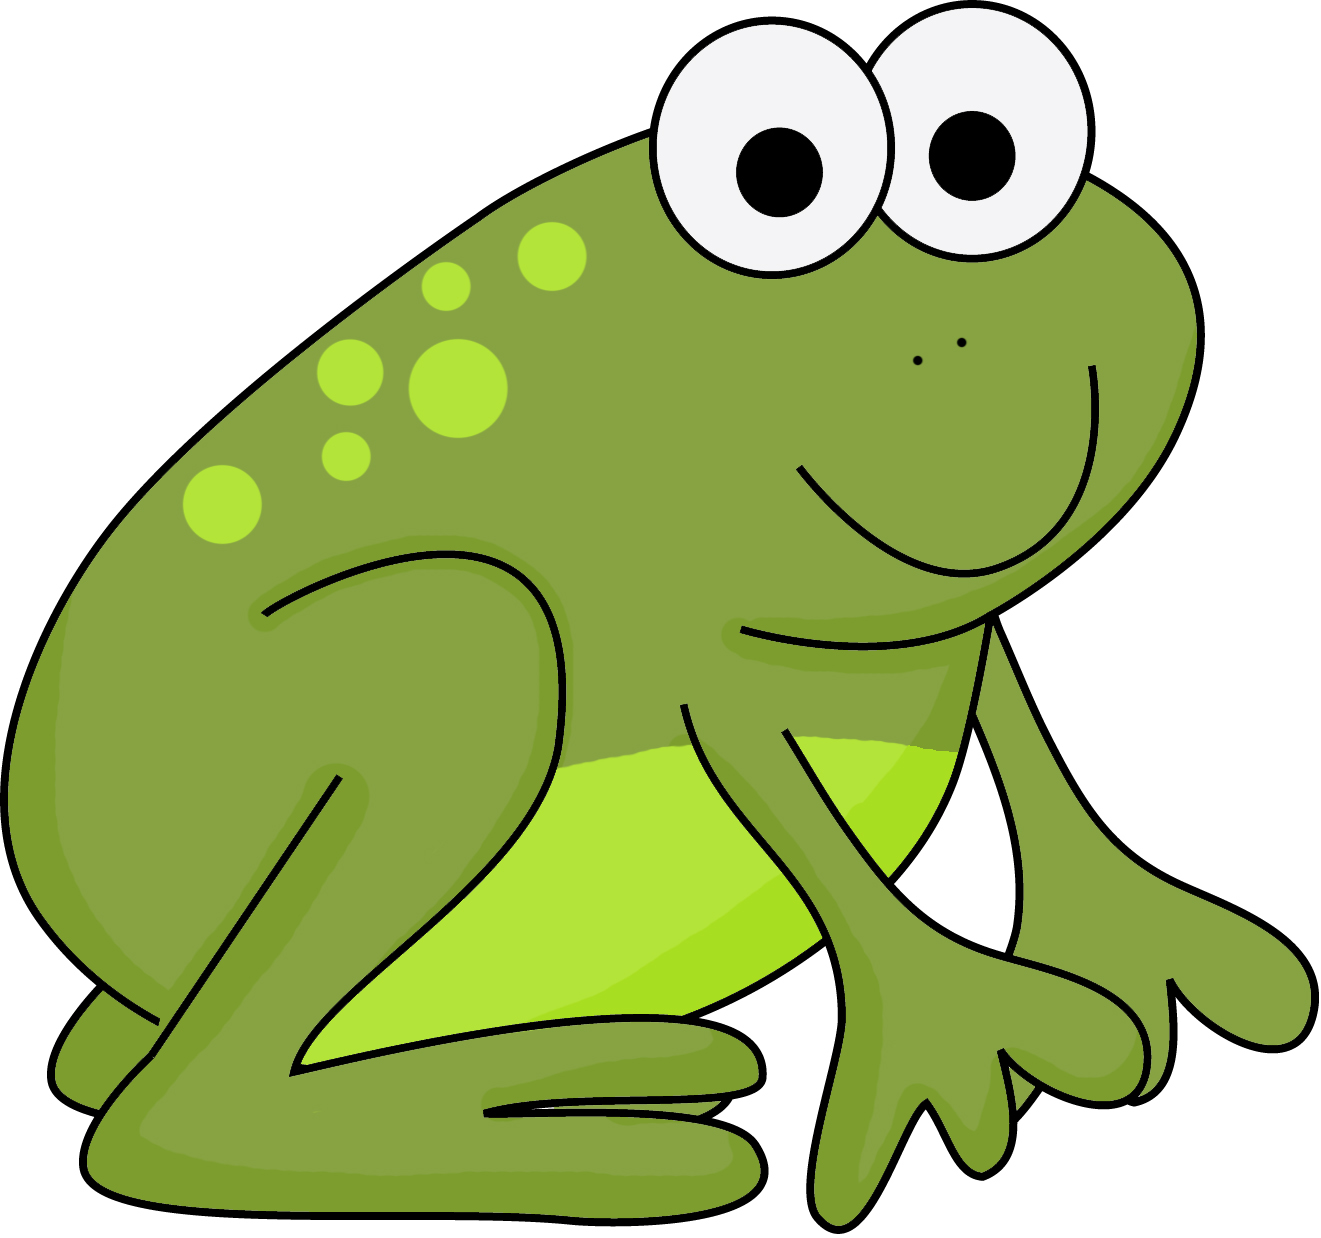 Toad Clipart & Toad Clip Art Images.